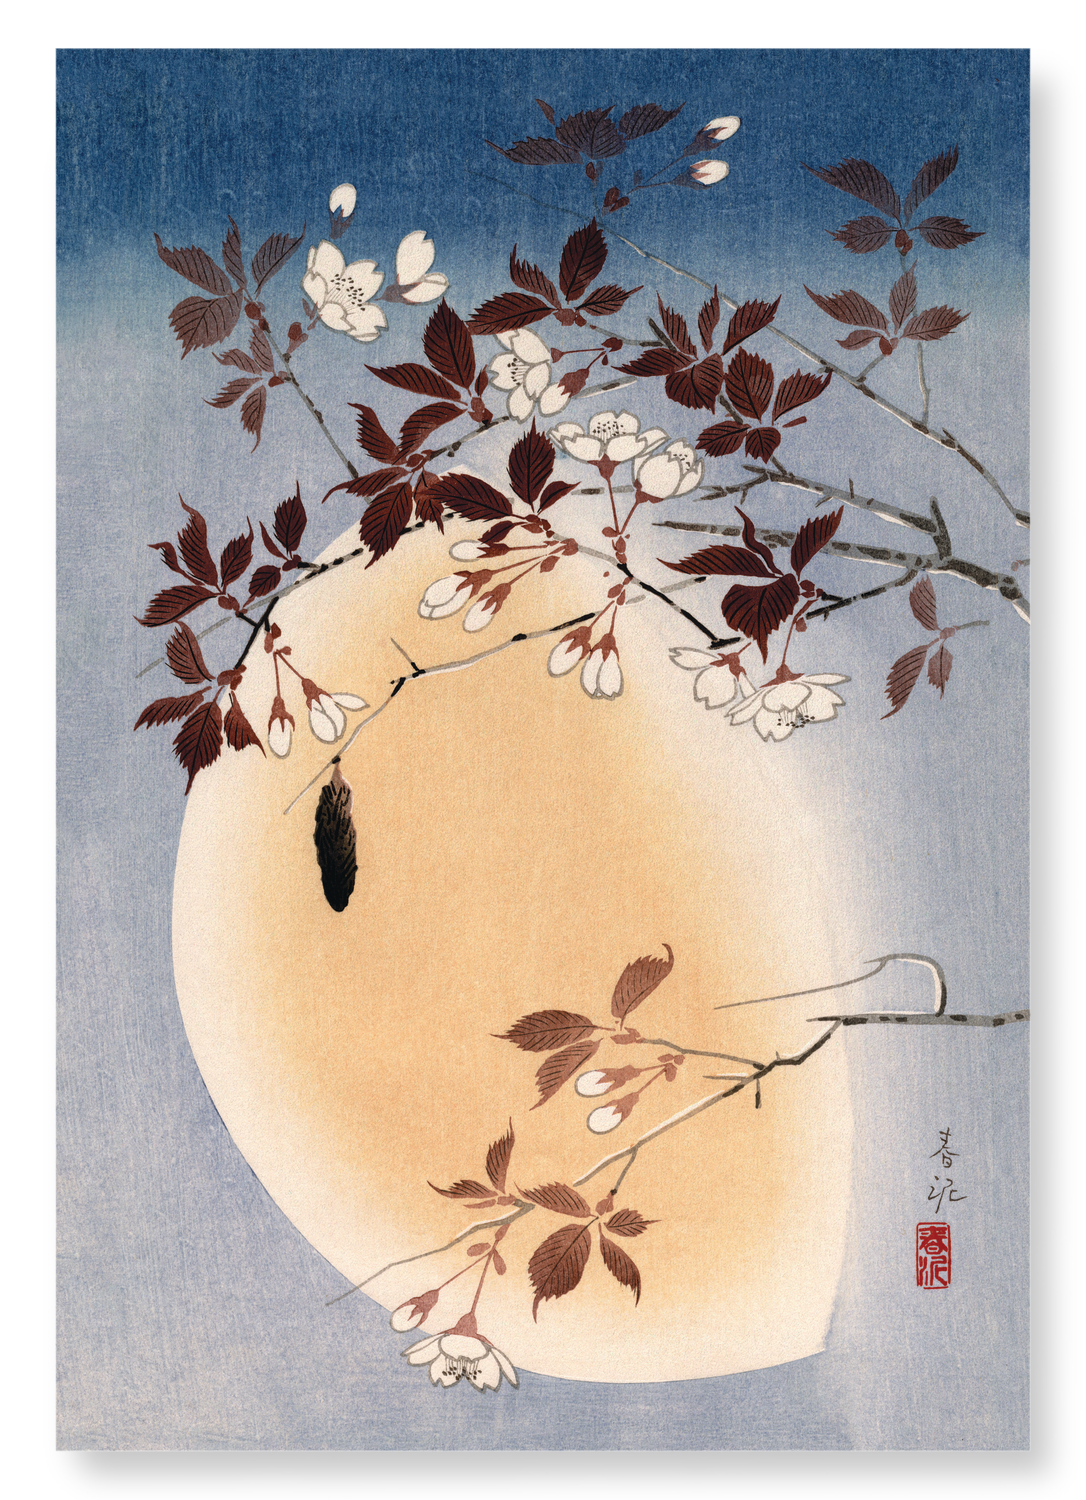 BLOSSOMS AND MOON: Japanese Art Print